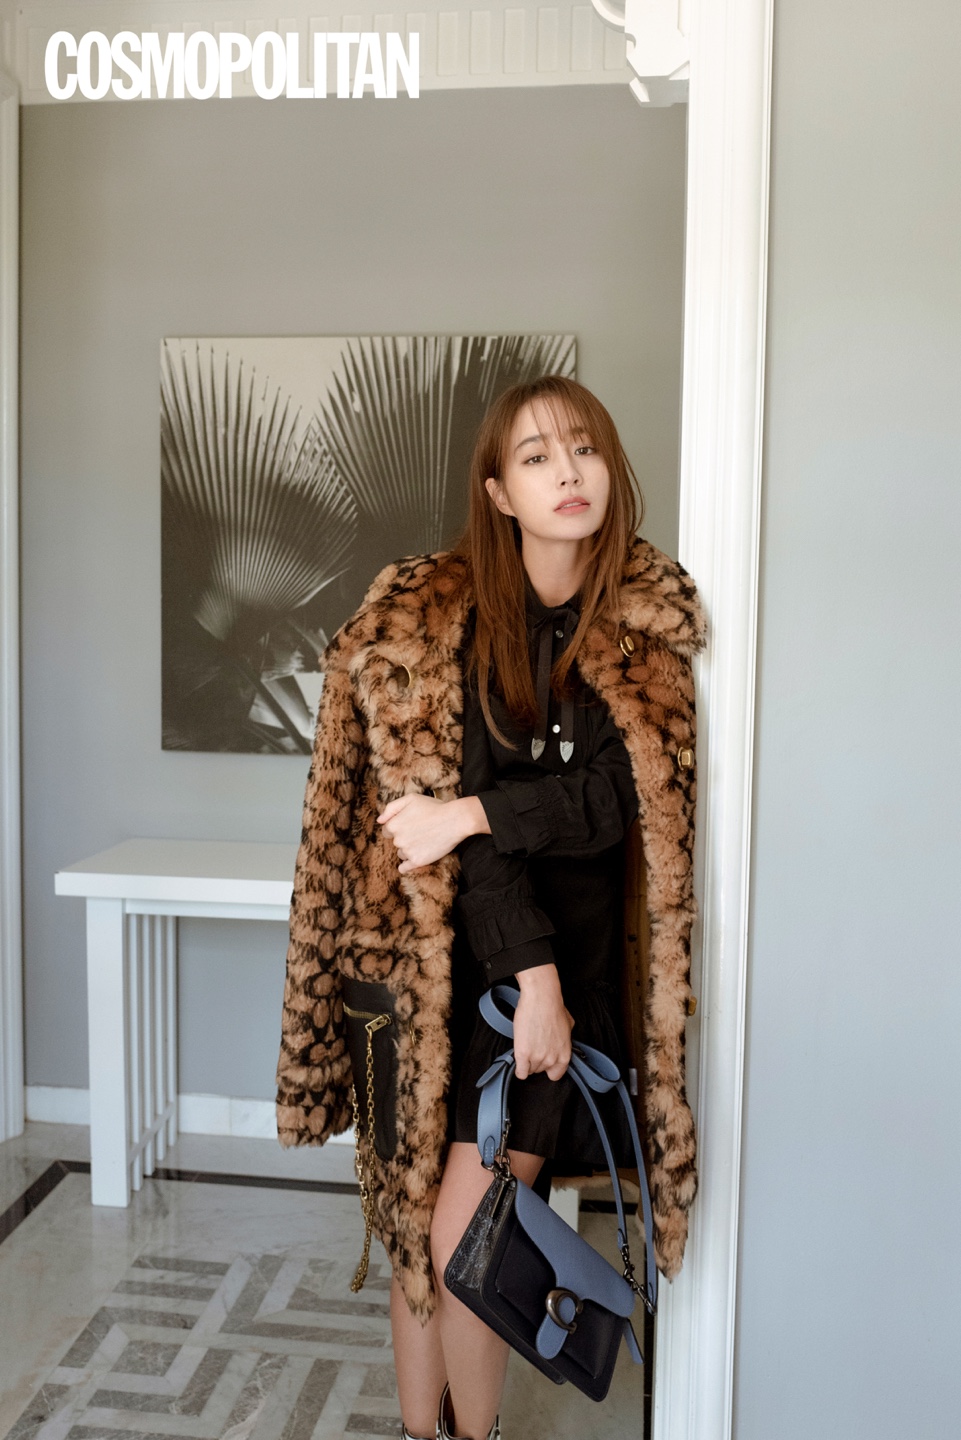 Actor Lee Min-jung, who has been gathering steady attention recently on TVN entertainment Sevilles Barber, released the picture through the September issue of fashion magazine Cosmopolitan.The picture, titled La Vie Est Belle (life is beautiful), depicts Lee Min-jung, who spends a leisurely time at a resort in Bali.The warm sunshine of Bali has added a calm and elegant atmosphere of Lee Min-jung, capturing the attention of those who see it.Lee Min-jung in the public picture showed a sensual F/W styling with perfect colorful costumes including colorful shearing coats, casual sneakers and unique jewelery.Lee Min-jungs fashion picture, which enjoys a special daily life in Bali, can be found in the September issue of Cosmopolitan, Cosmopolitan SNS account, and website.iMBC Kim Kyung Hee  Photos Cosmopolitan